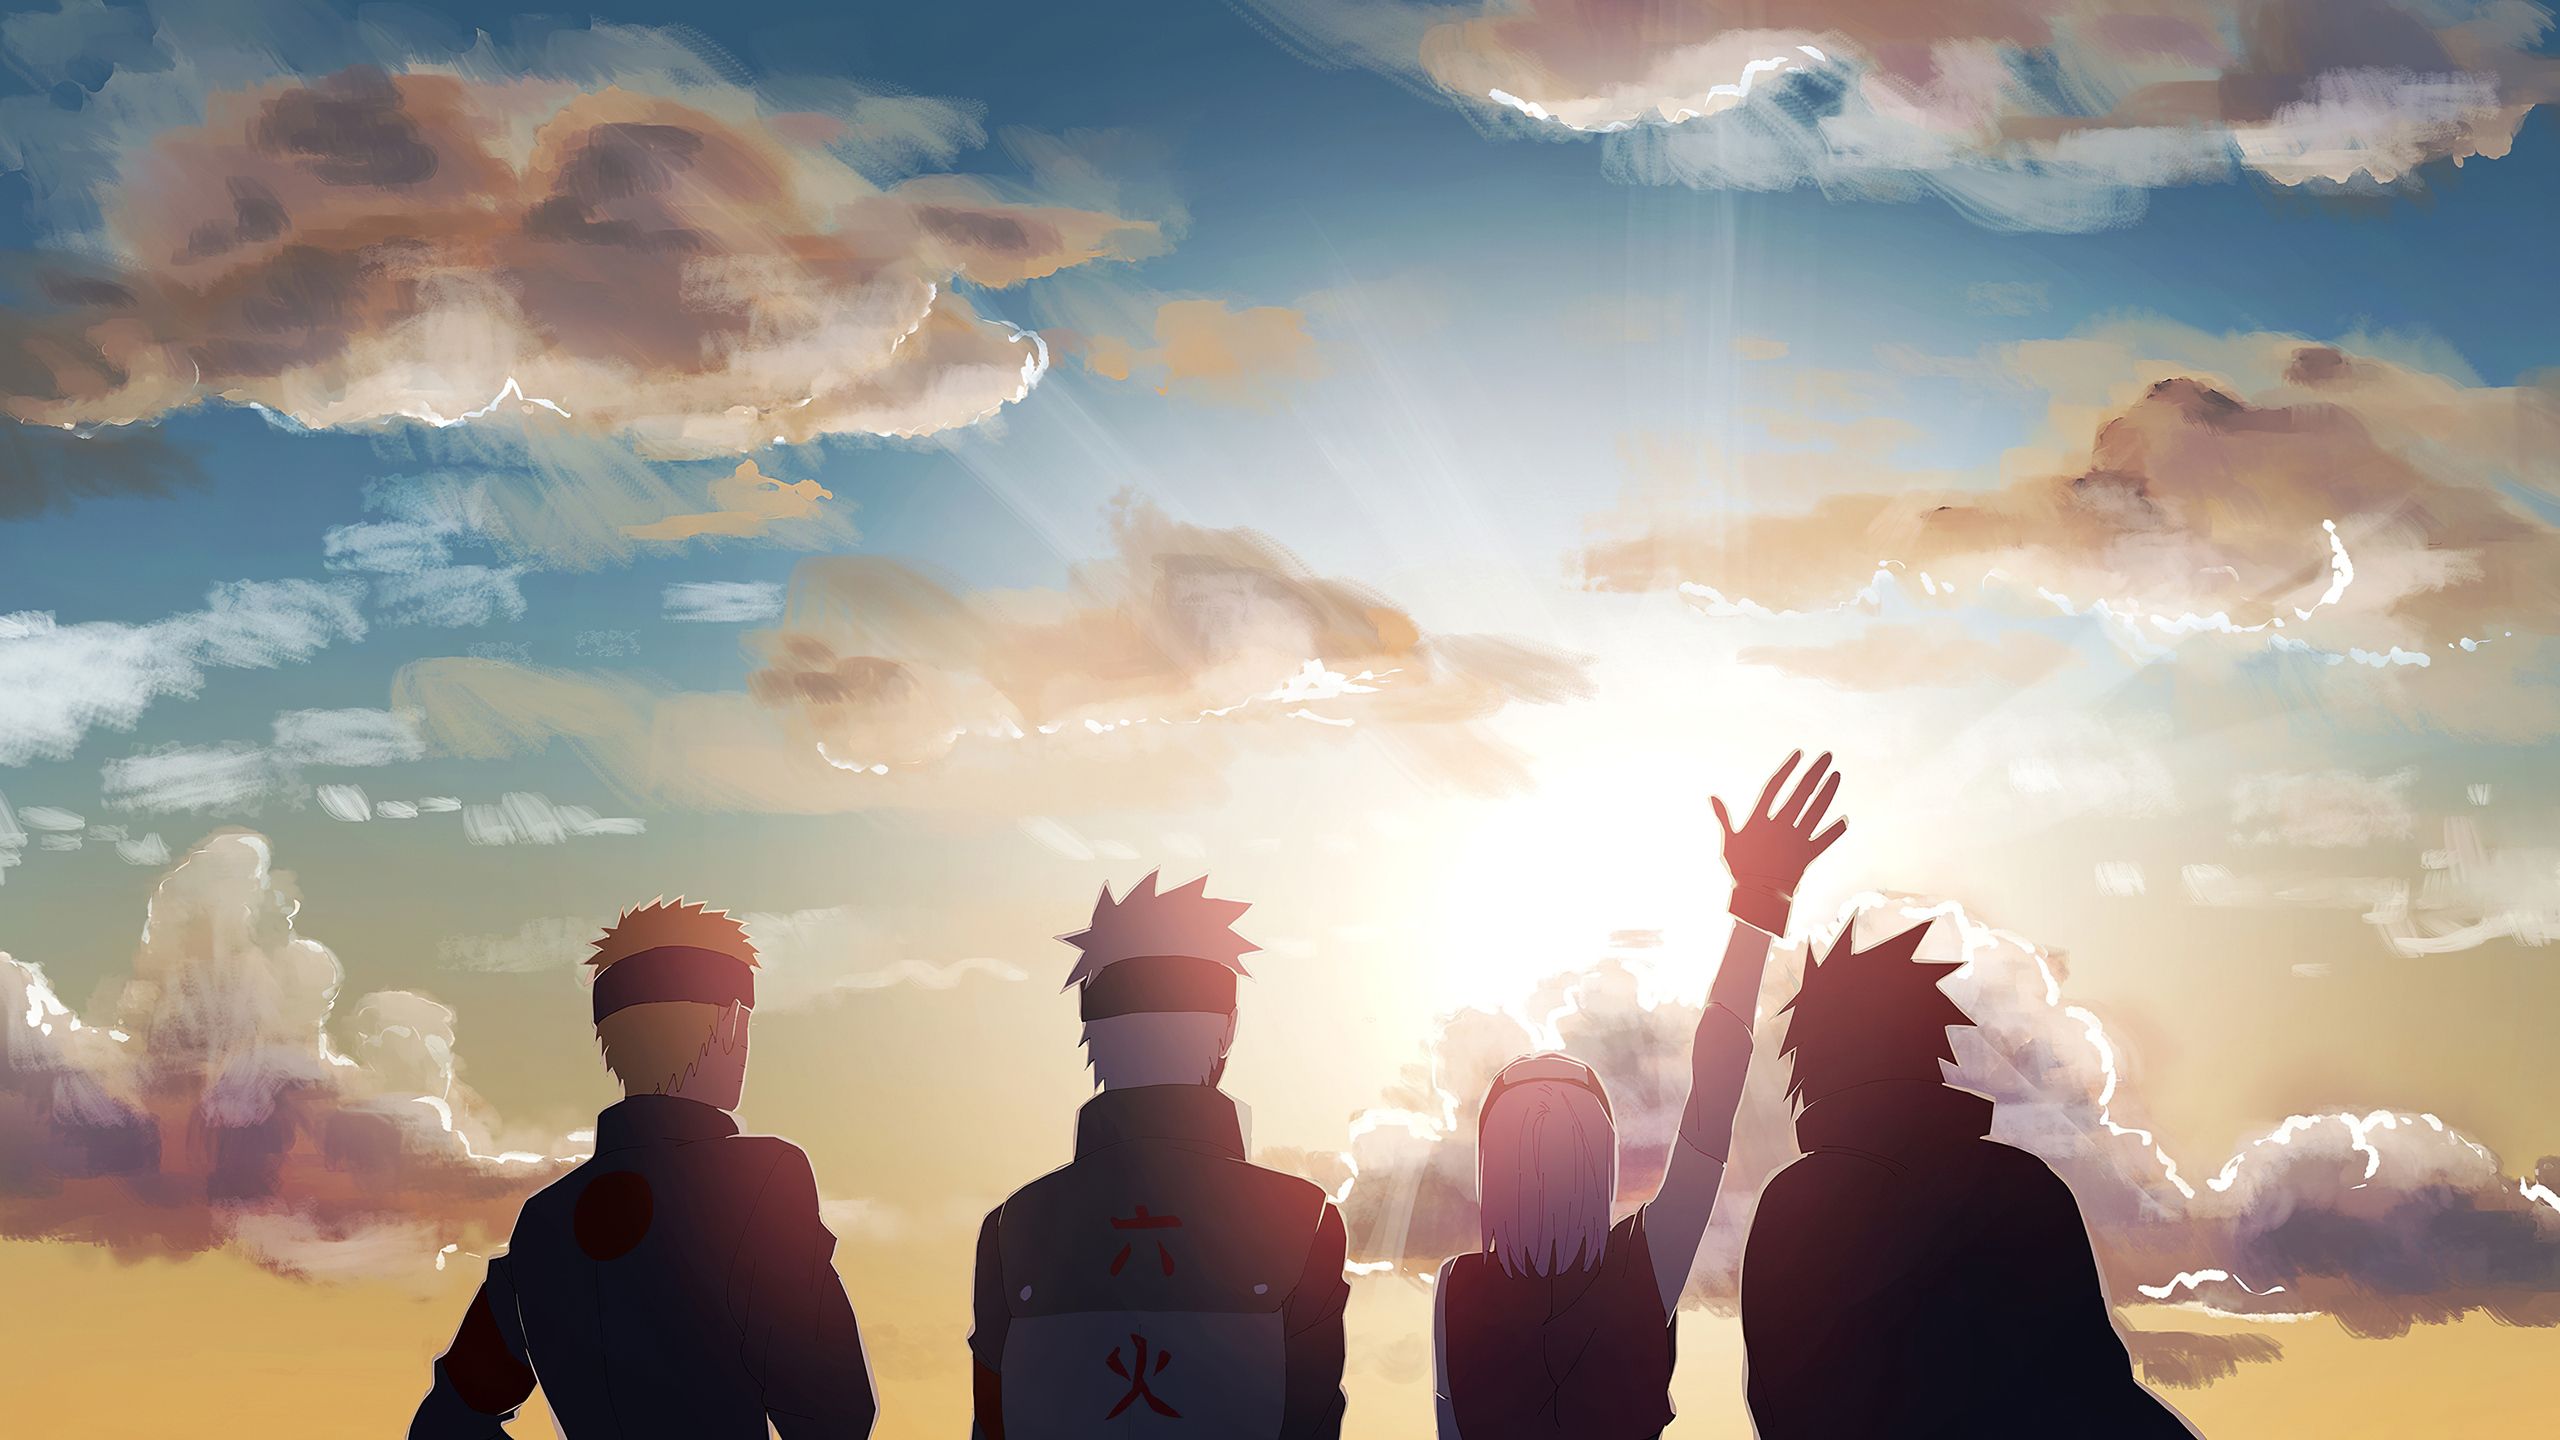 Naruto Anime Art 4k 1440P Resolution HD 4k Wallpaper, Image, Background, Photo and Picture